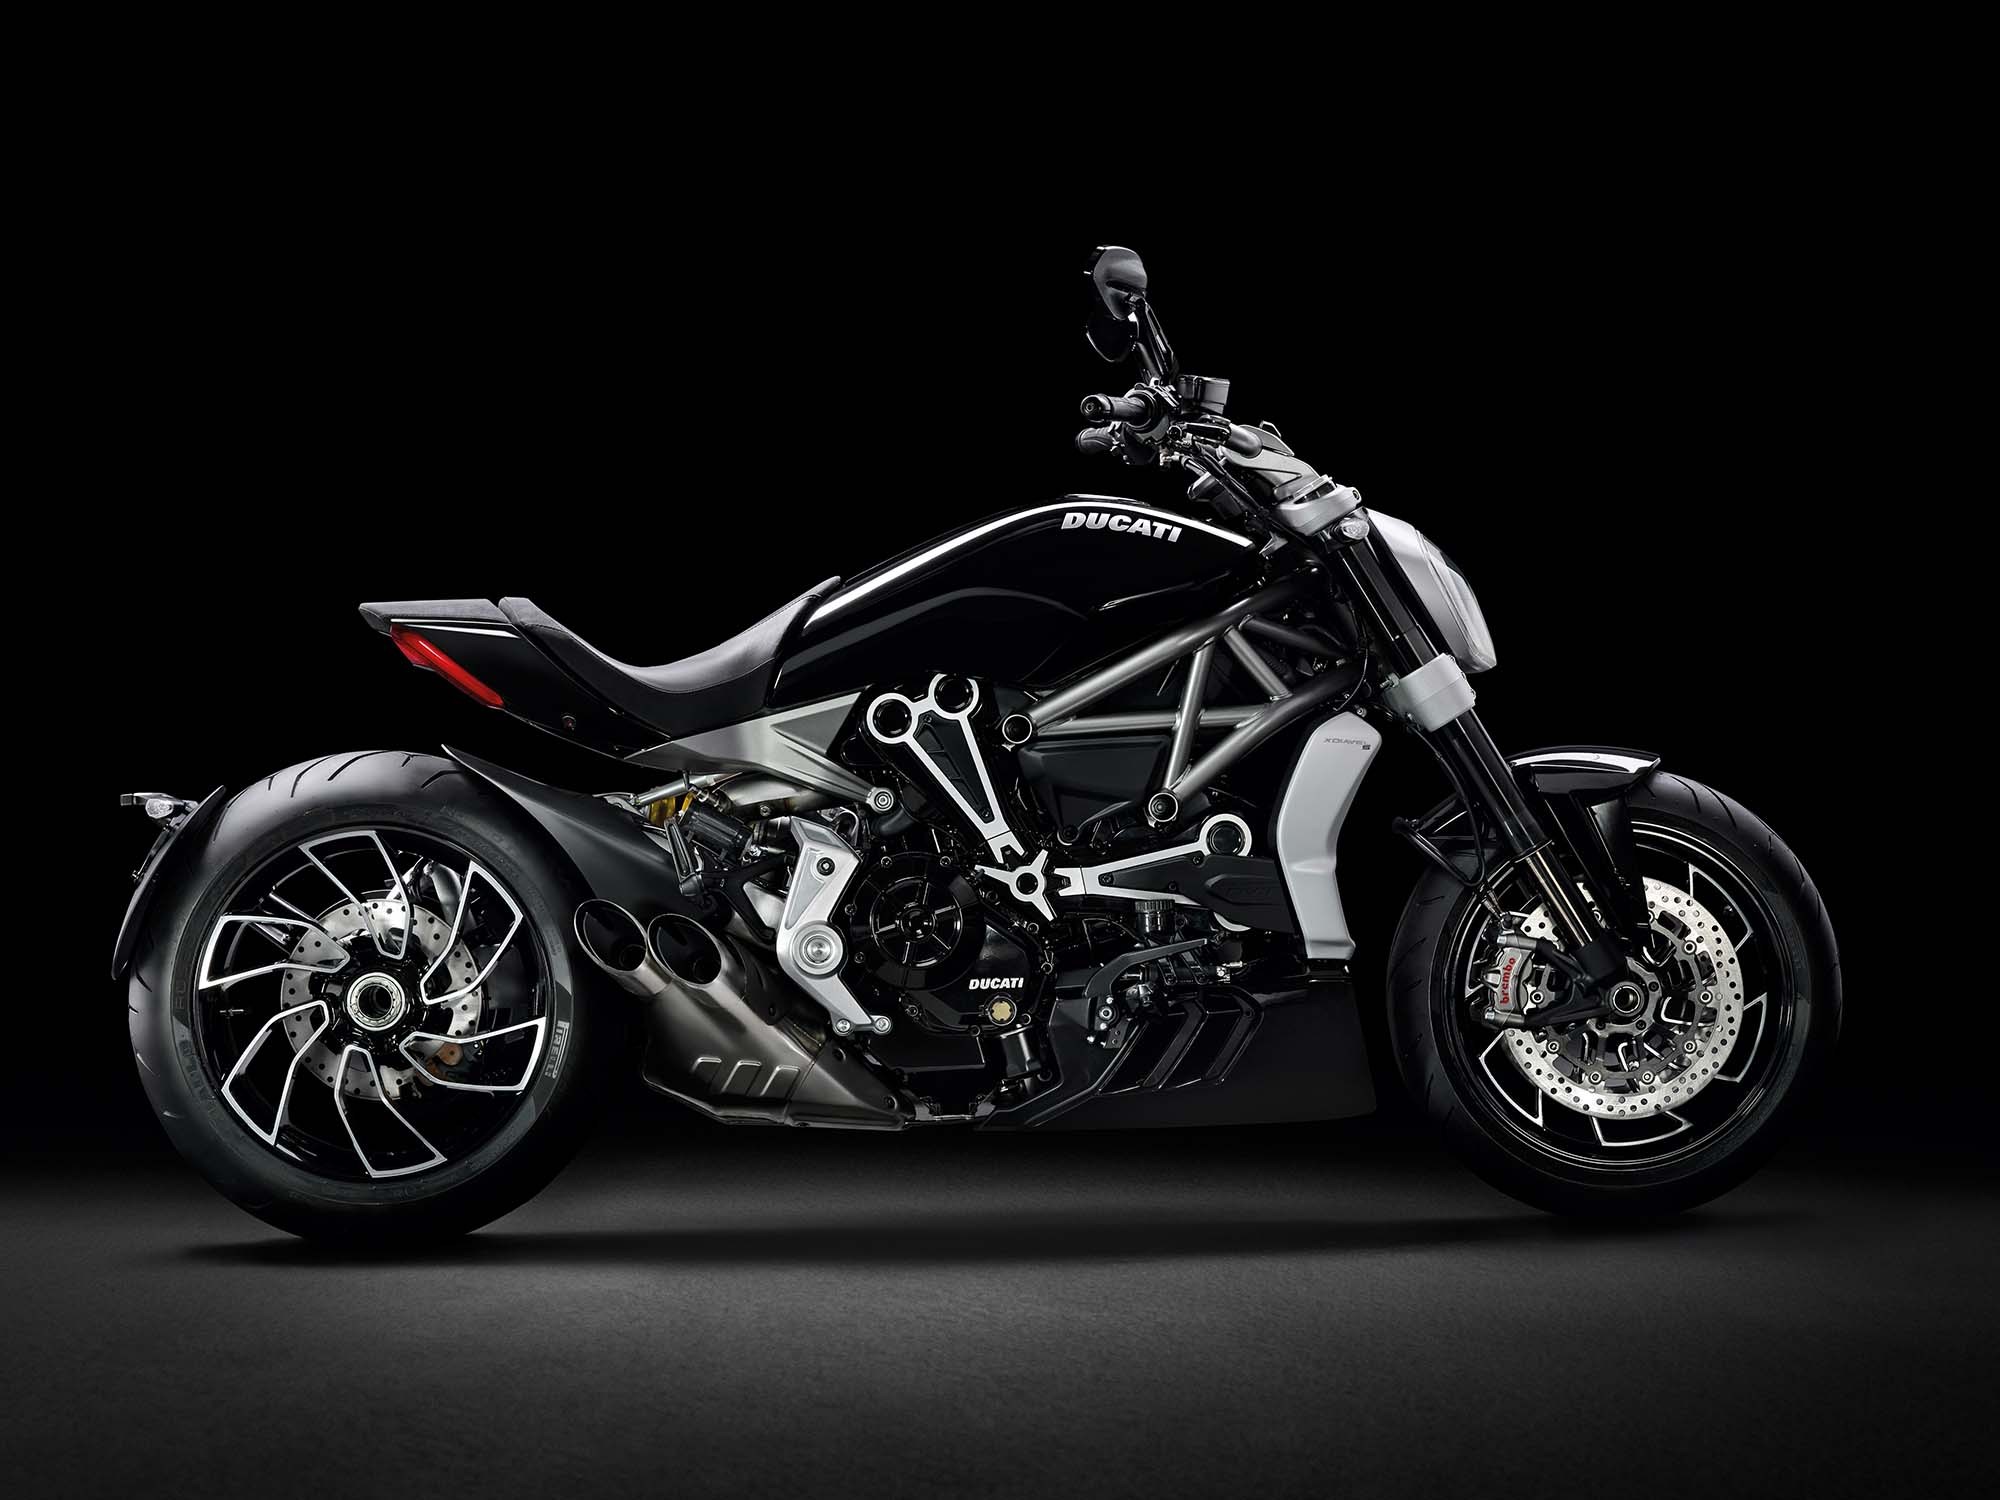 Ducati xDiavel coming to India this September for Rs 15.56 lakh